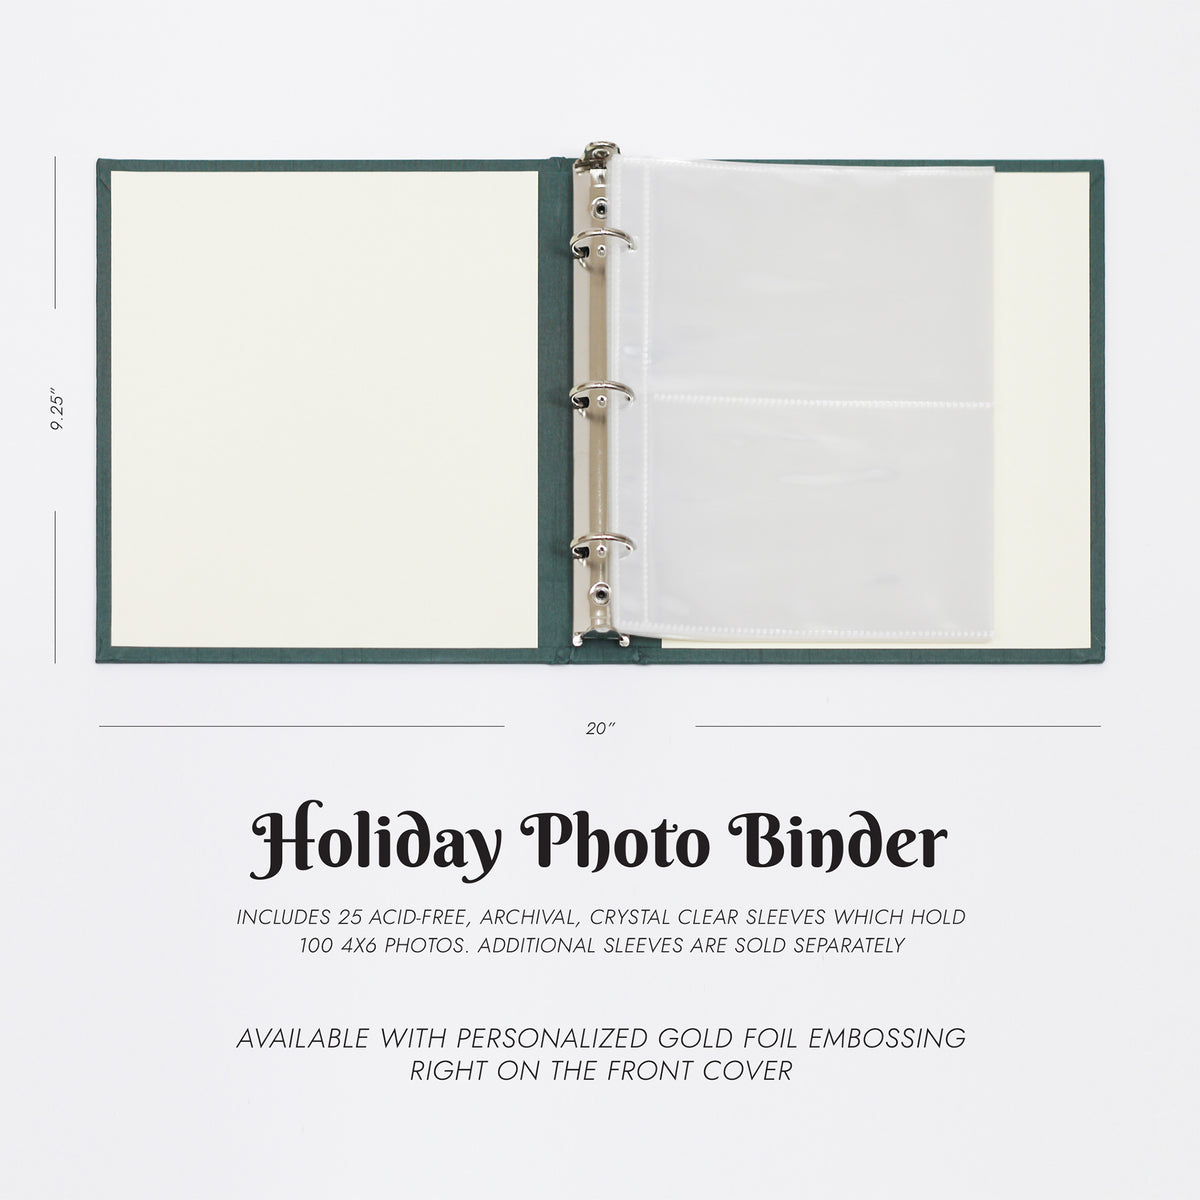 Medium Holiday Photo Binder with Red Vegan Leather Cover for 4x6 Photos